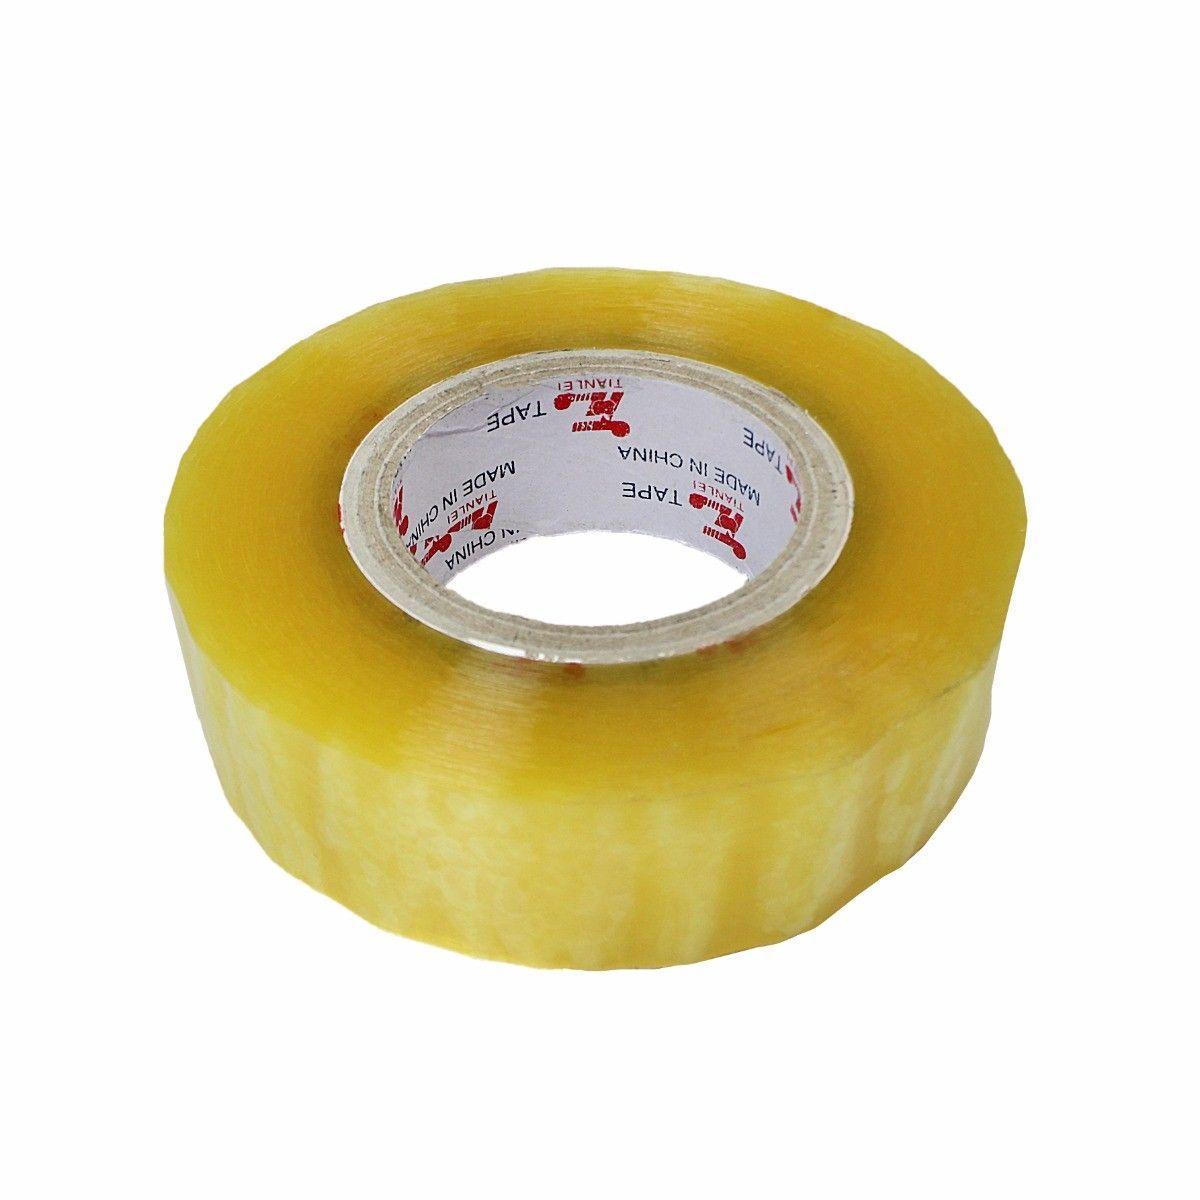 Big Clear Packing Roll Tape 1 Pack Sealing Tape Home Work 3162 (Parcel Rate)